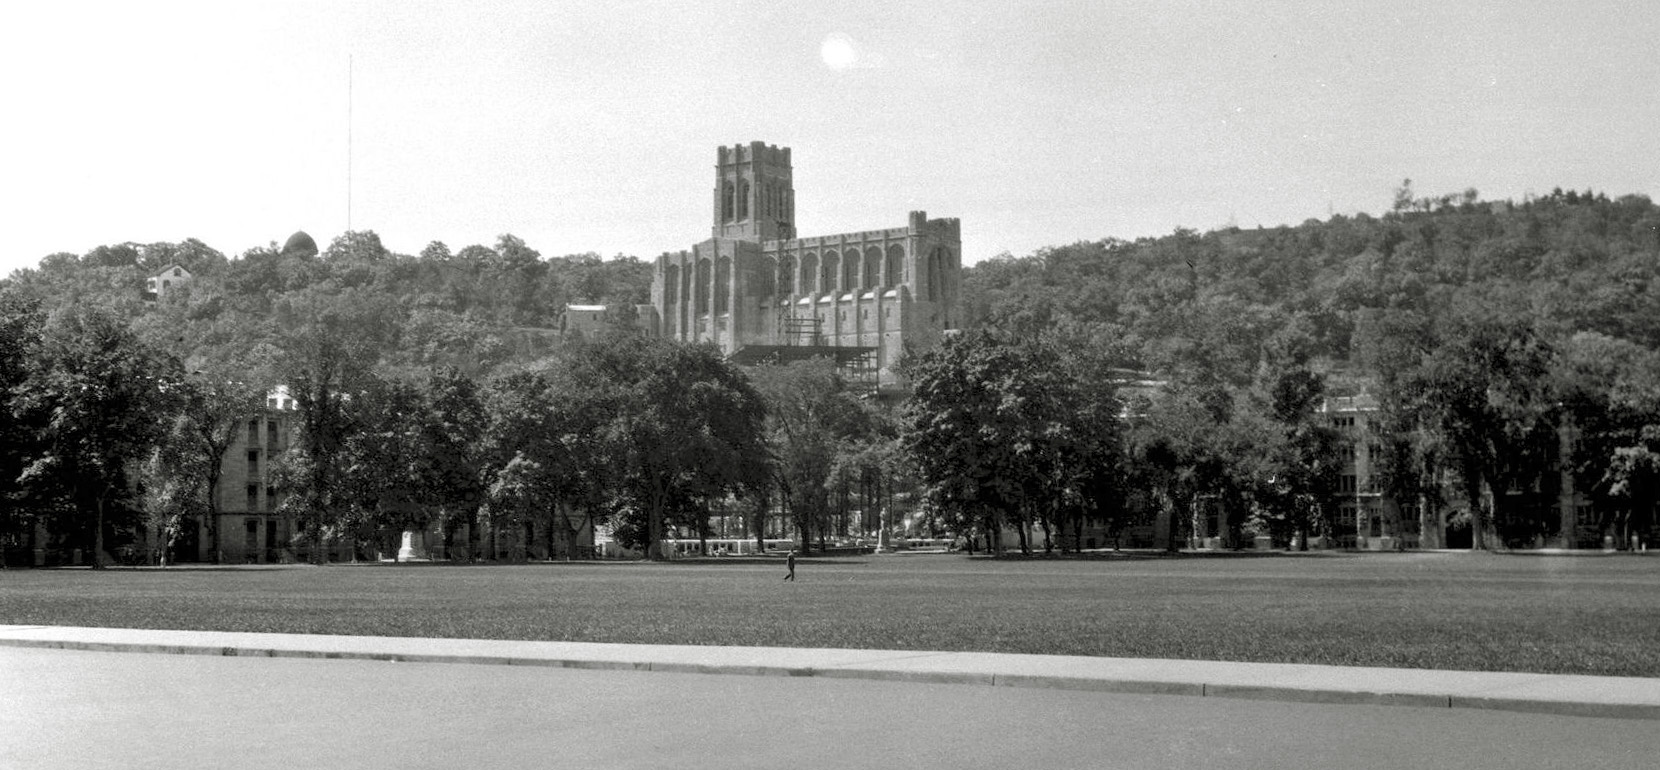 Well folks, time to play "Guess That Building." I have no information on this other than it looks like a large church or cathedral. Since most of my pictures are based in the Northeast US, I am thinking this building is located there too. From my negatives collection. View full size.